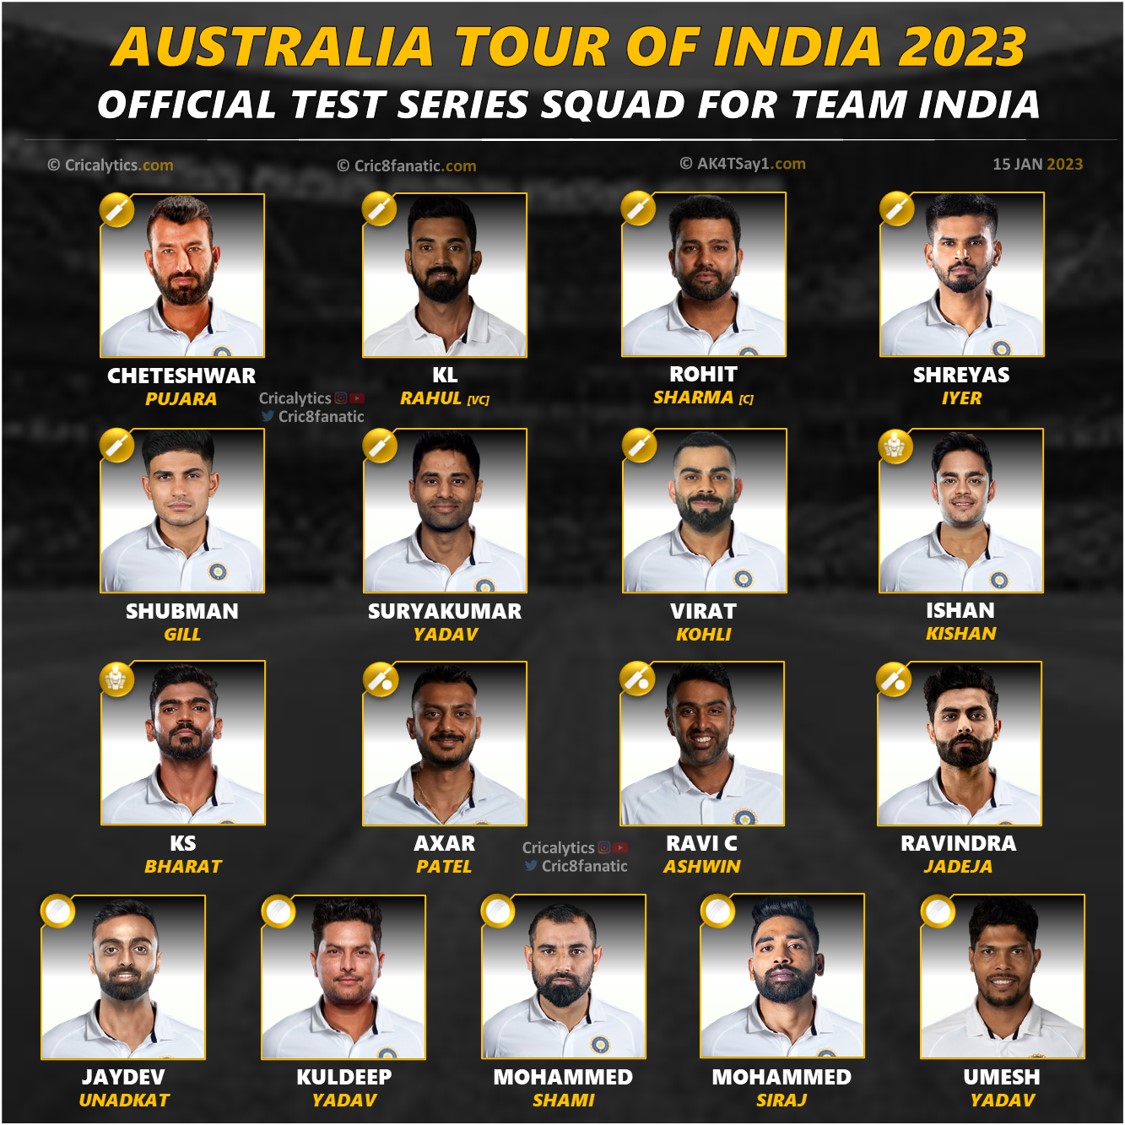 India vs Australia 2023 Full Squad and Players List for Both Teams